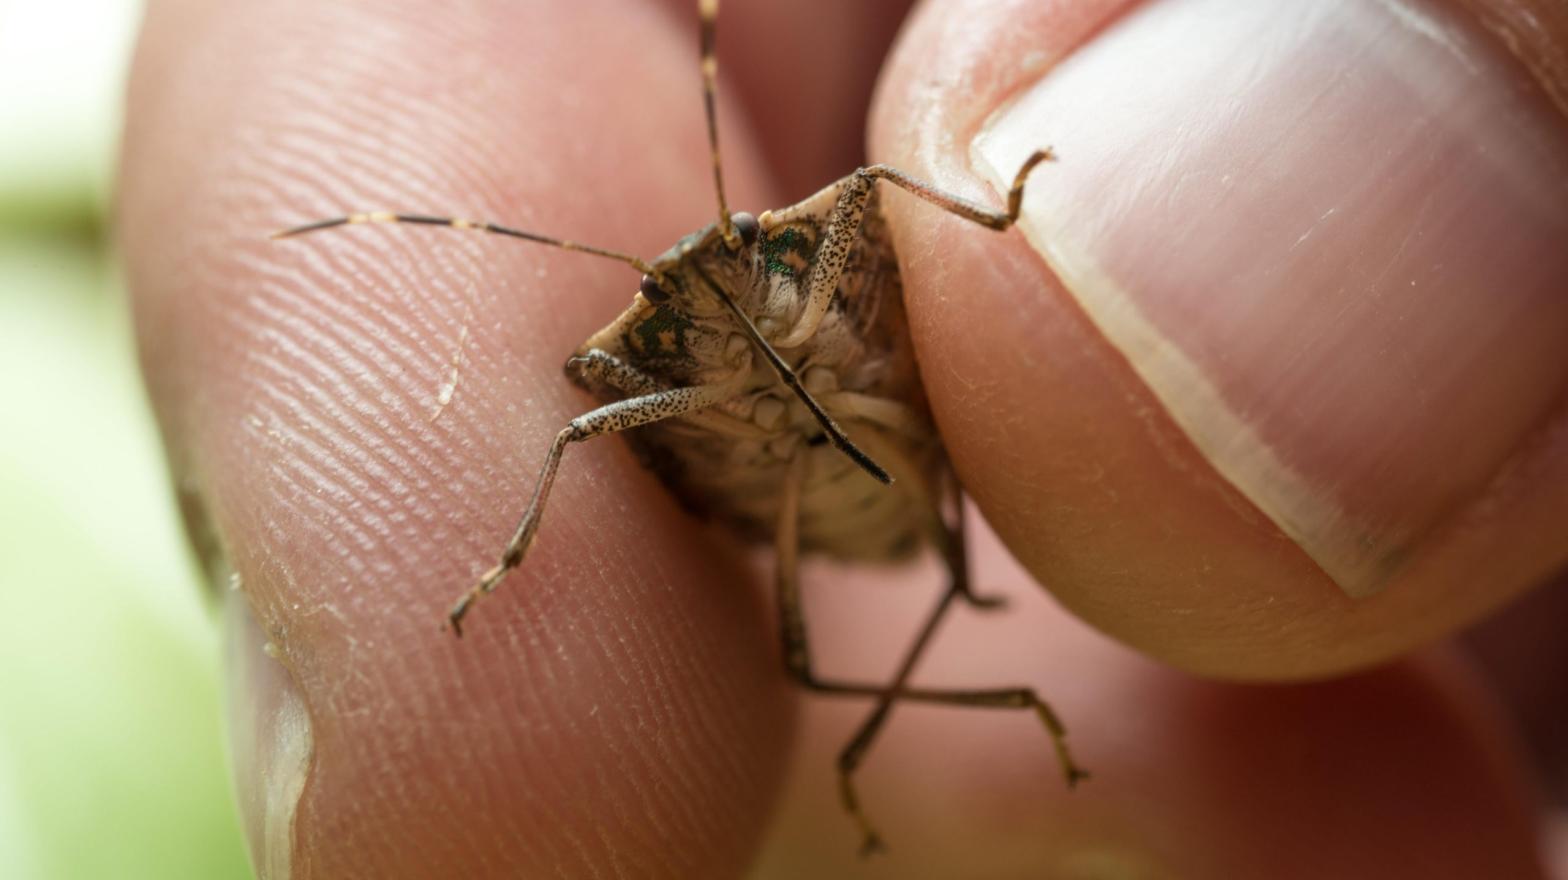 Halyomorpha halys, the brown marmorated stink bug. (Photo: Edwin Remsburg/VW Pics via Getty Images, Getty Images)